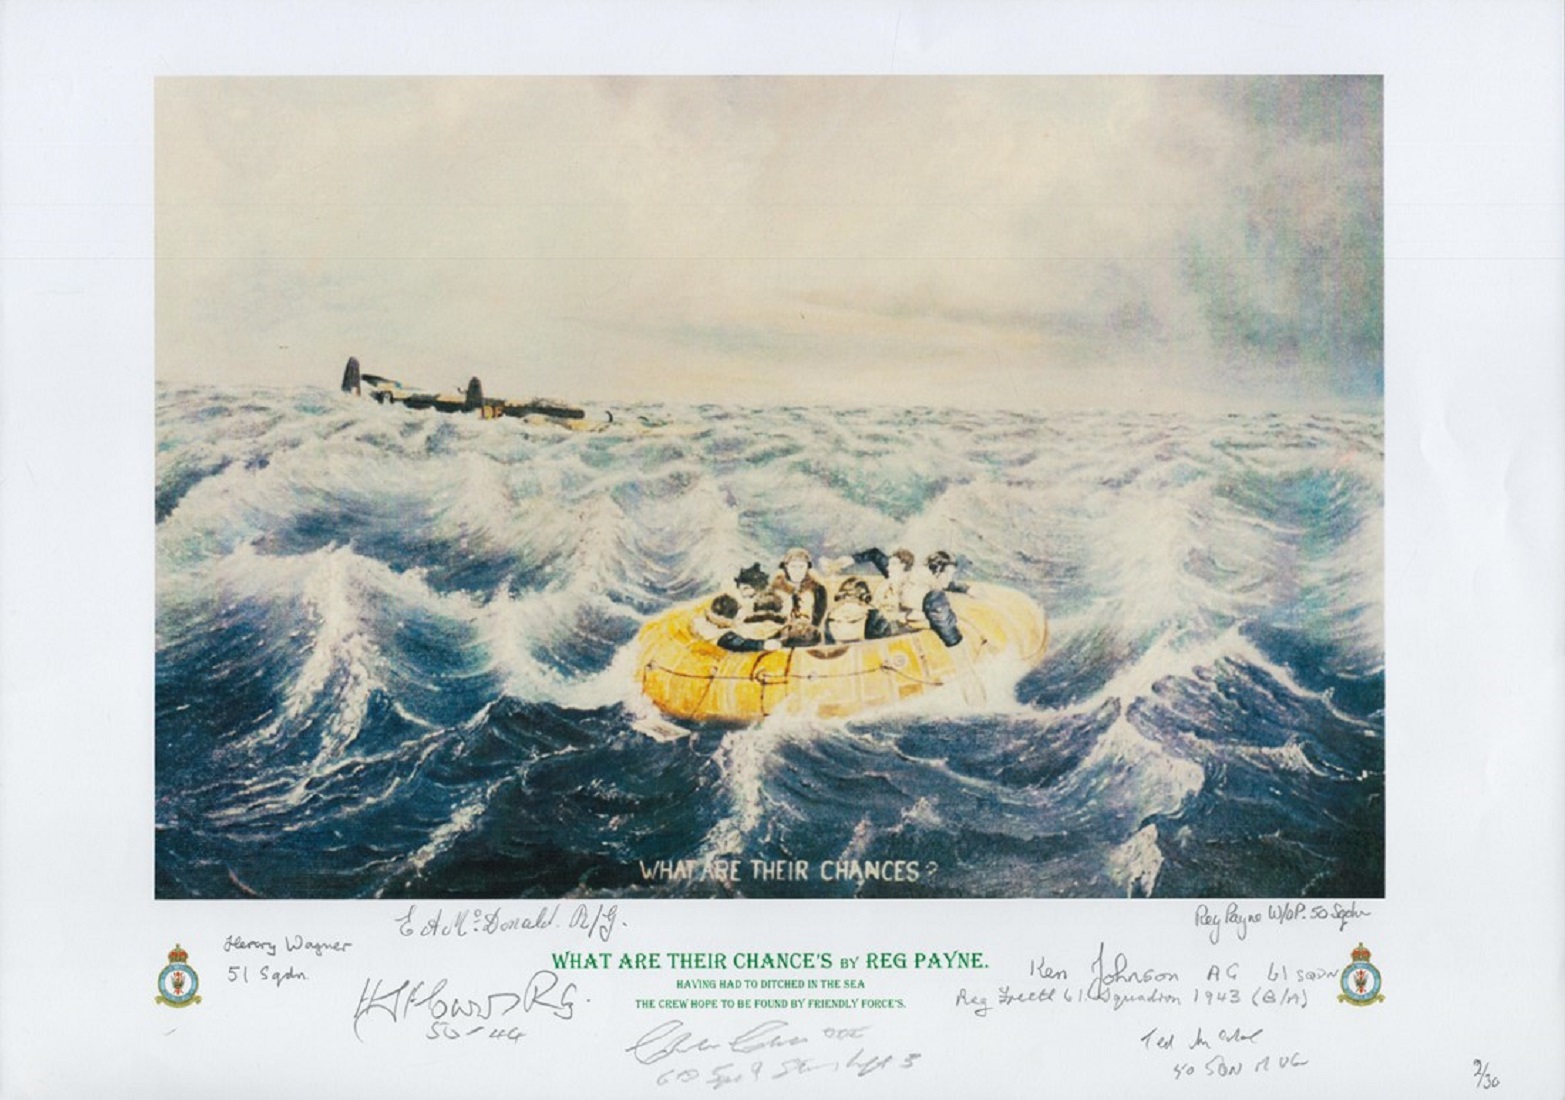 What are their chance's print by Reg Payne. Signed by 7 including Wagner, Johnson, Donald, Freeth